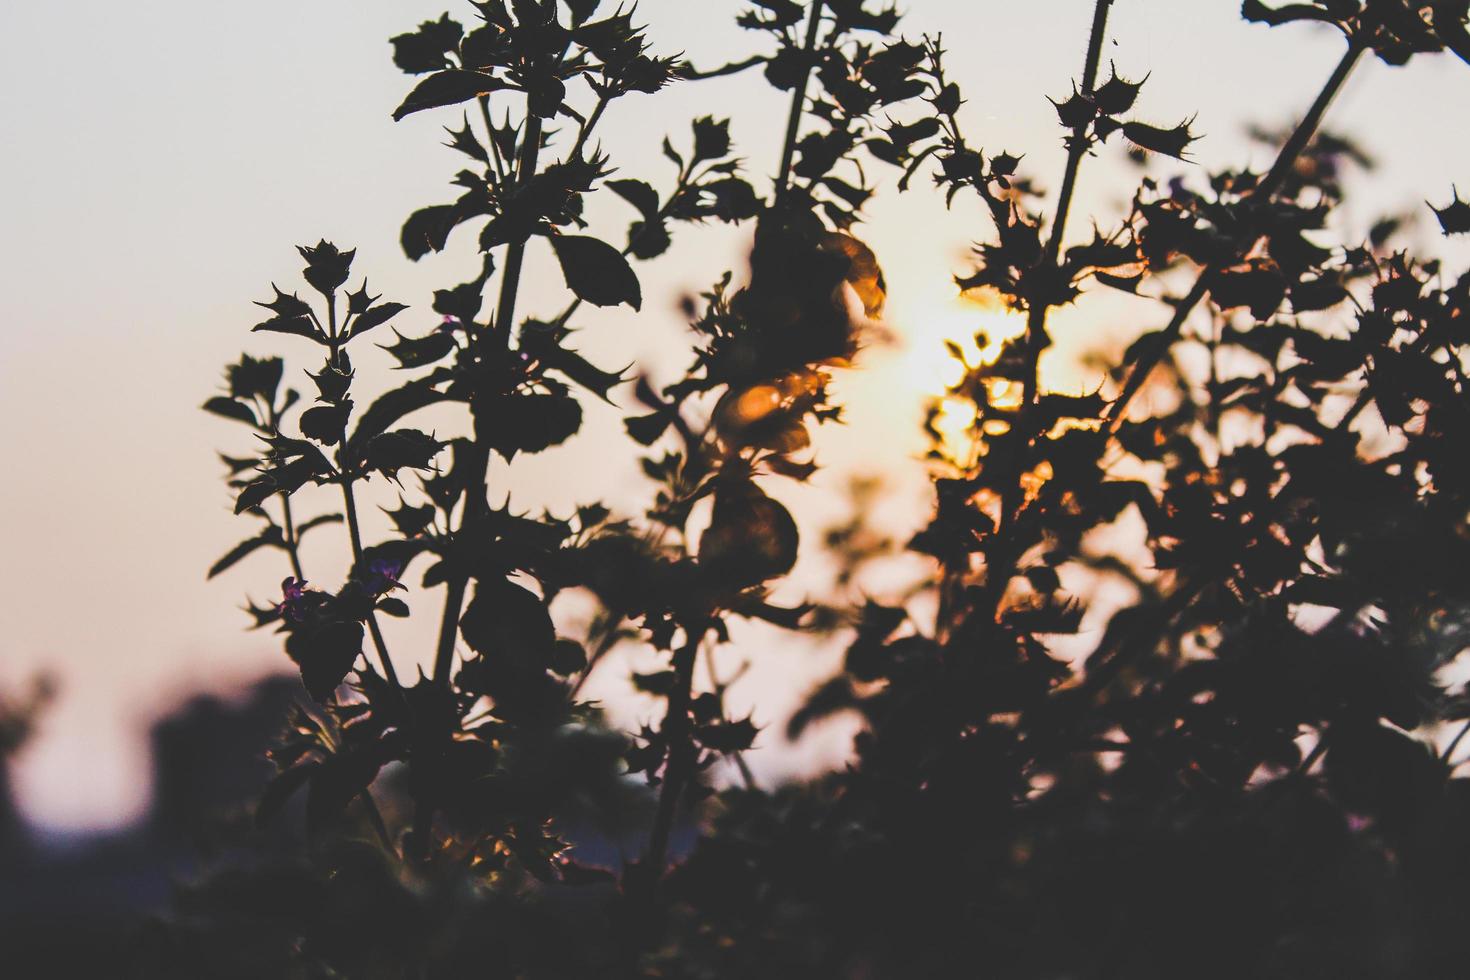 Silhouettes of plants at sunset photo